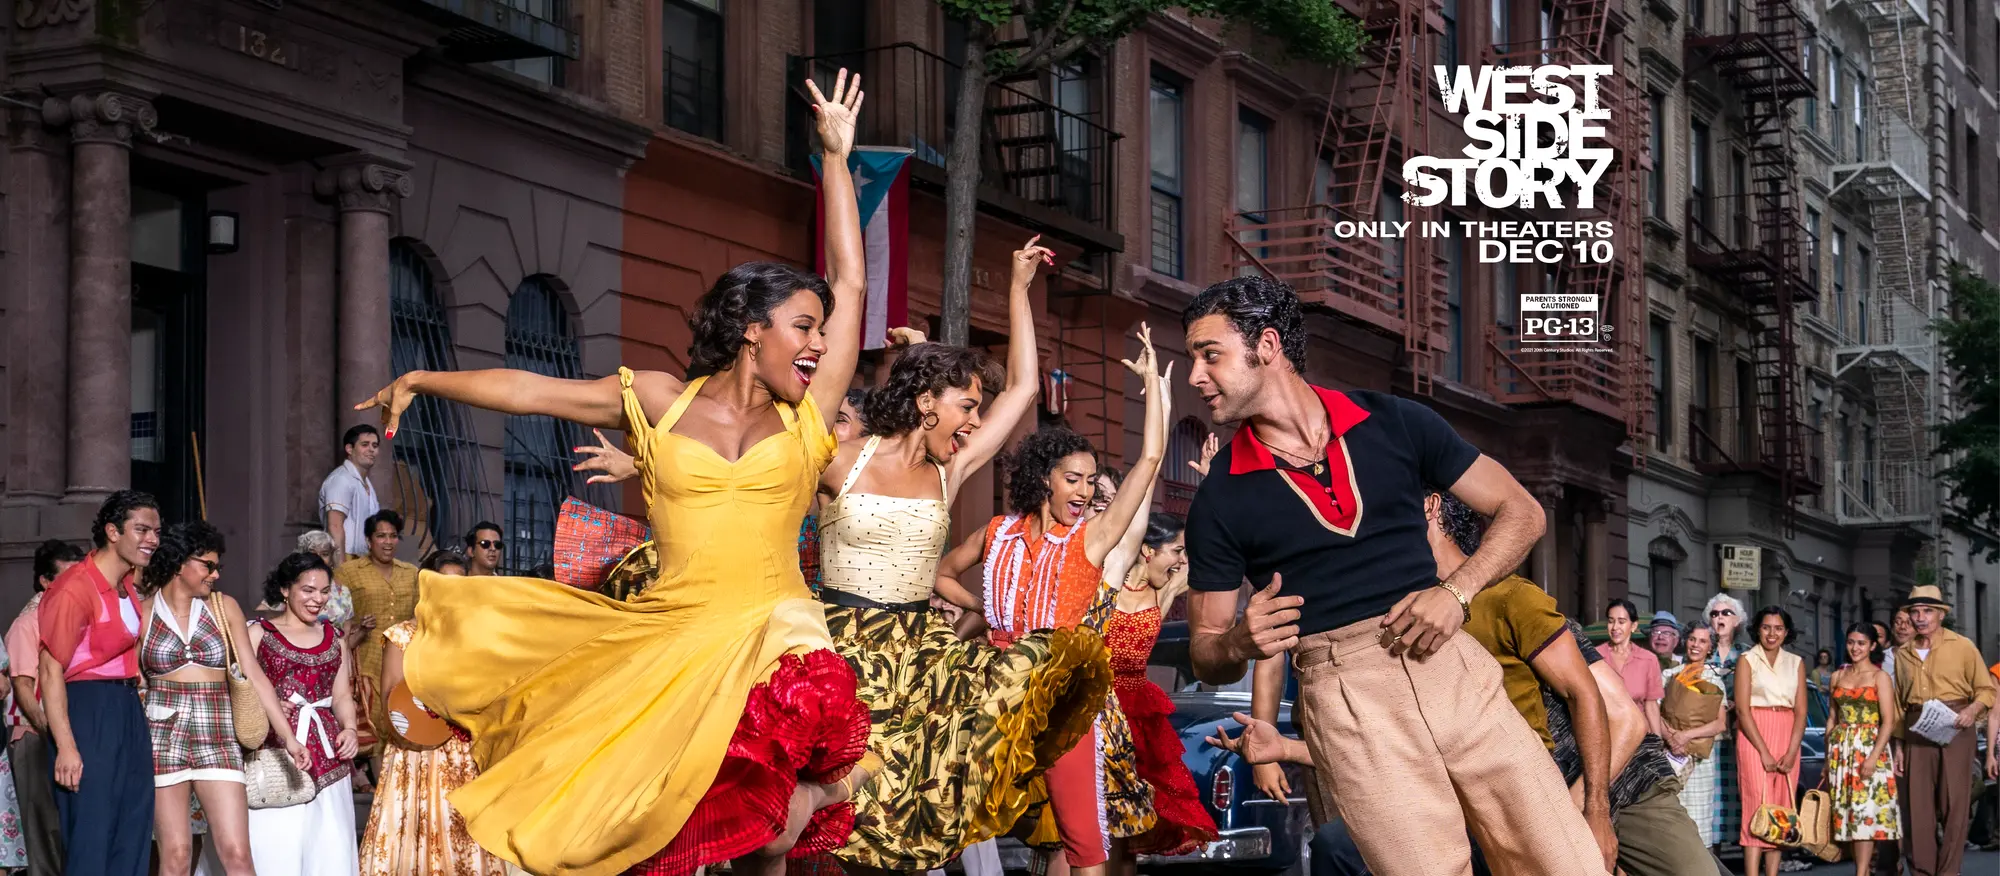 West Side Story image. 